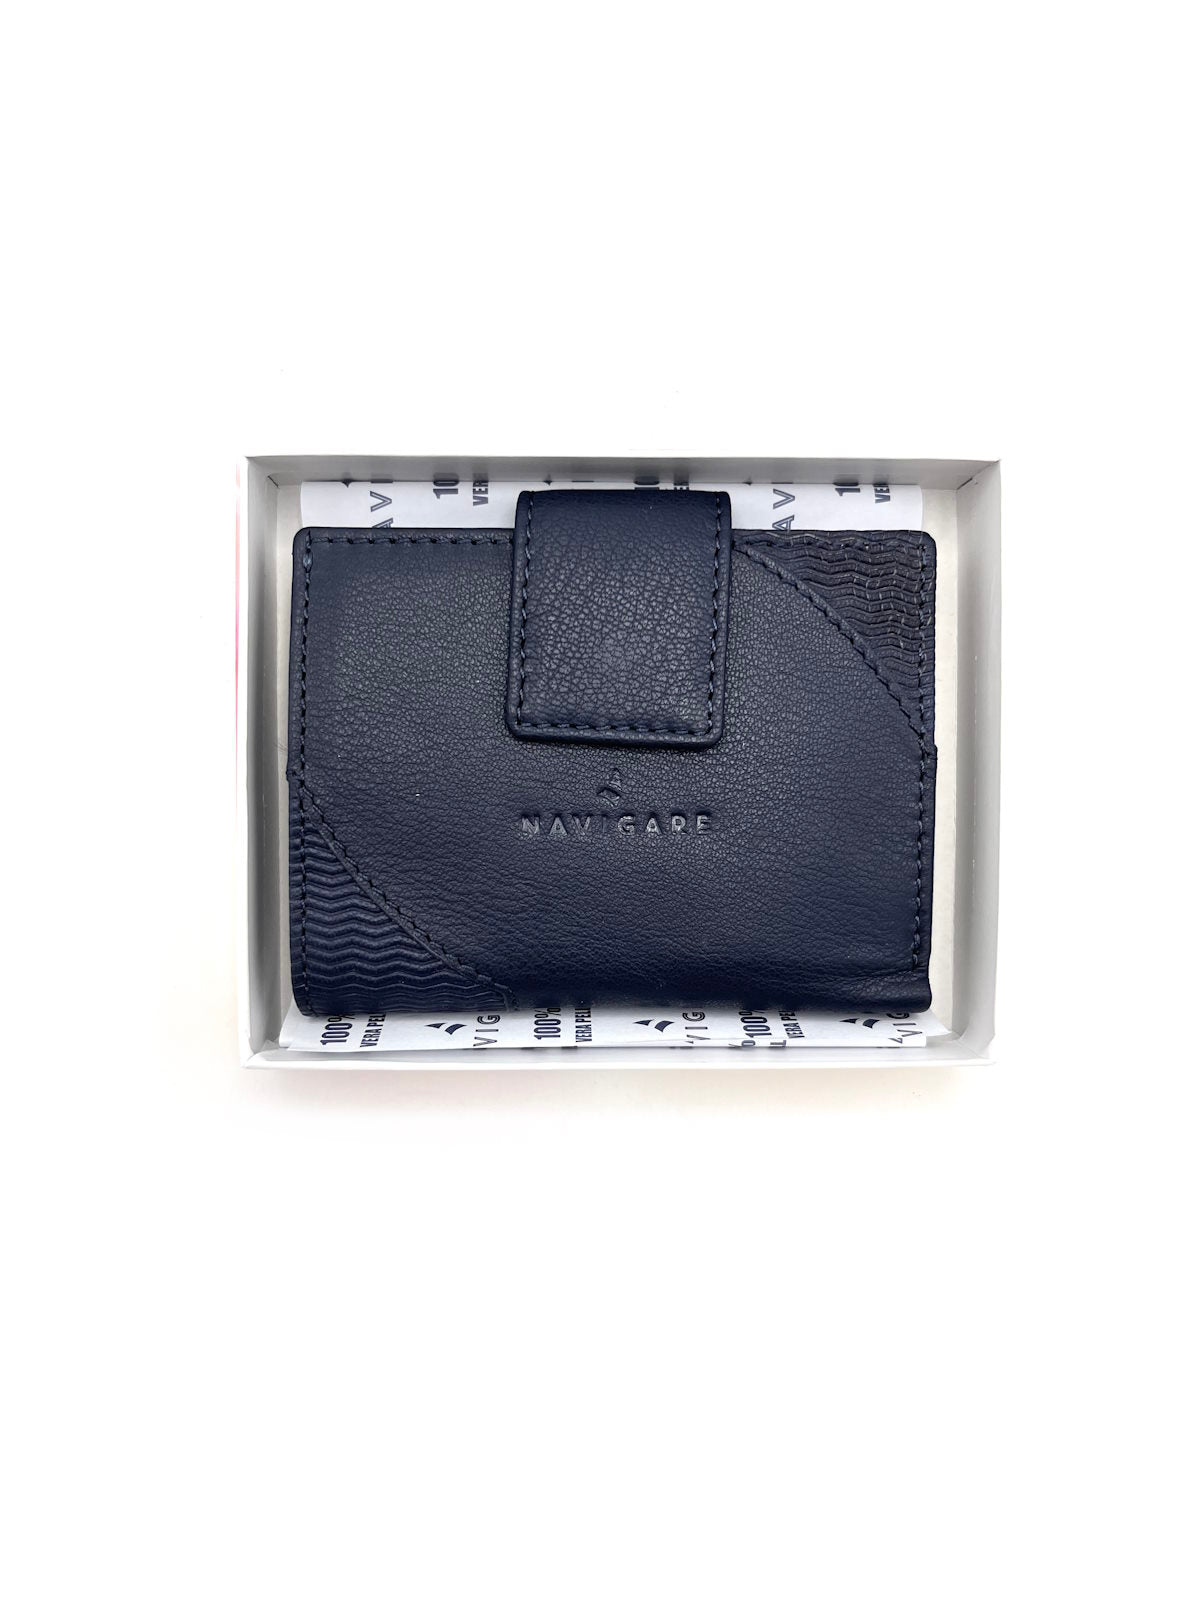 Genuine leather wallet, Navigare for women, art. PF793-82